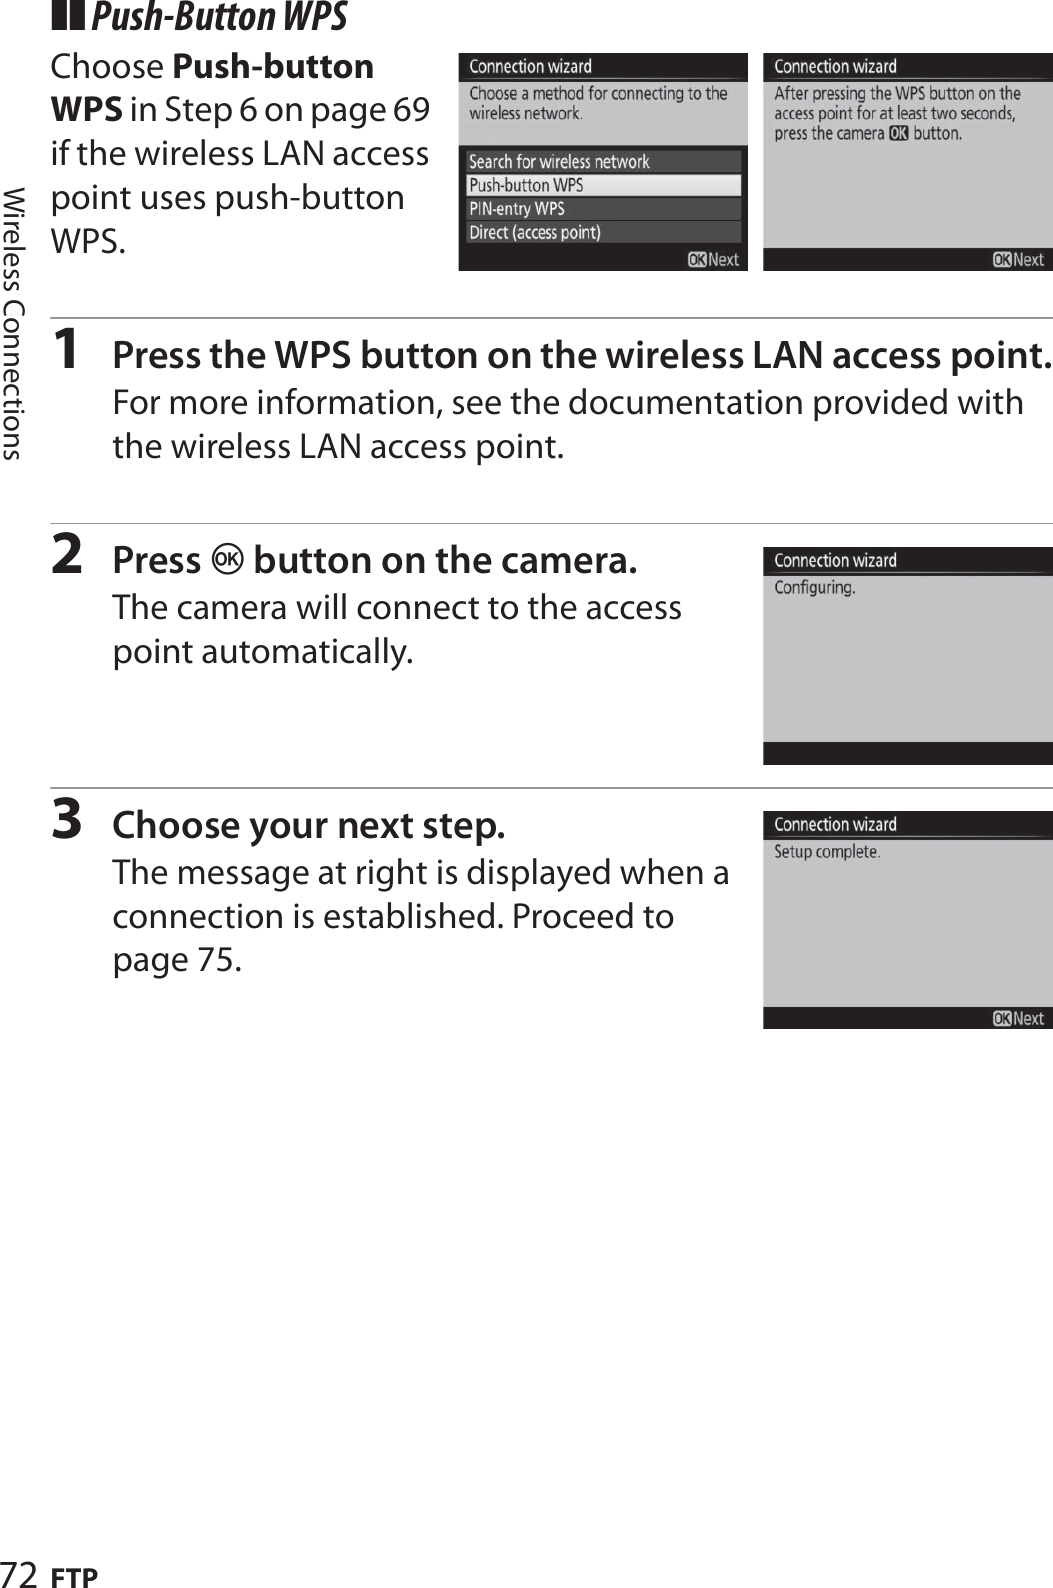 72 FTPWireless Connections❚❚ Push-Button WPSChoose Push-button WPS in Step 6 on page 69 if the wireless LAN access point uses push-button WPS.1Press the WPS button on the wireless LAN access point.For more information, see the documentation provided with the wireless LAN access point.2Press J button on the camera.The camera will connect to the access point automatically.3Choose your next step.The message at right is displayed when a connection is established. Proceed to page 75.